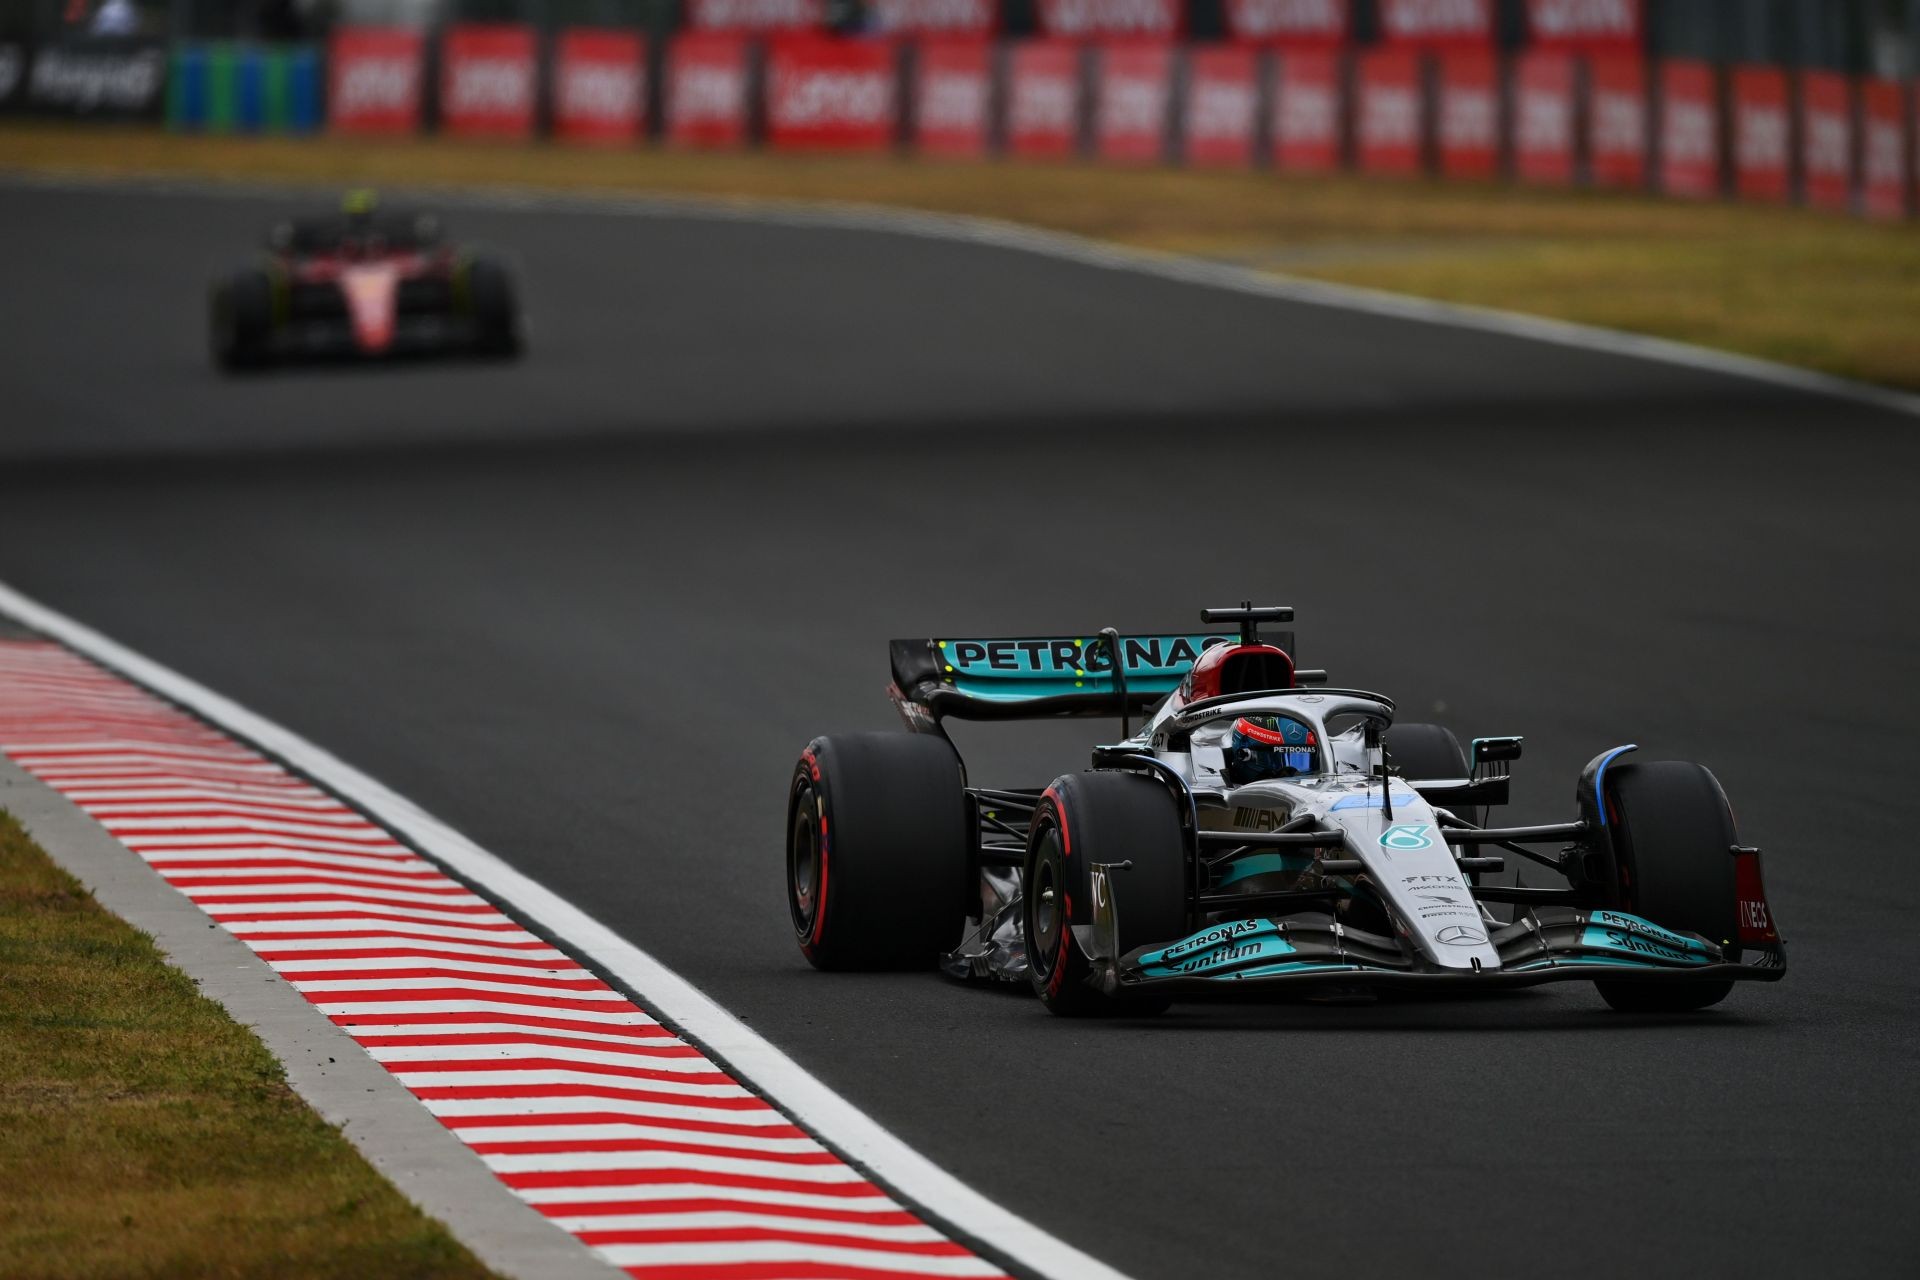 F1 News: George Russell Content With P3 Finish At 2022 F1 Hungarian GP After Late Race Struggles